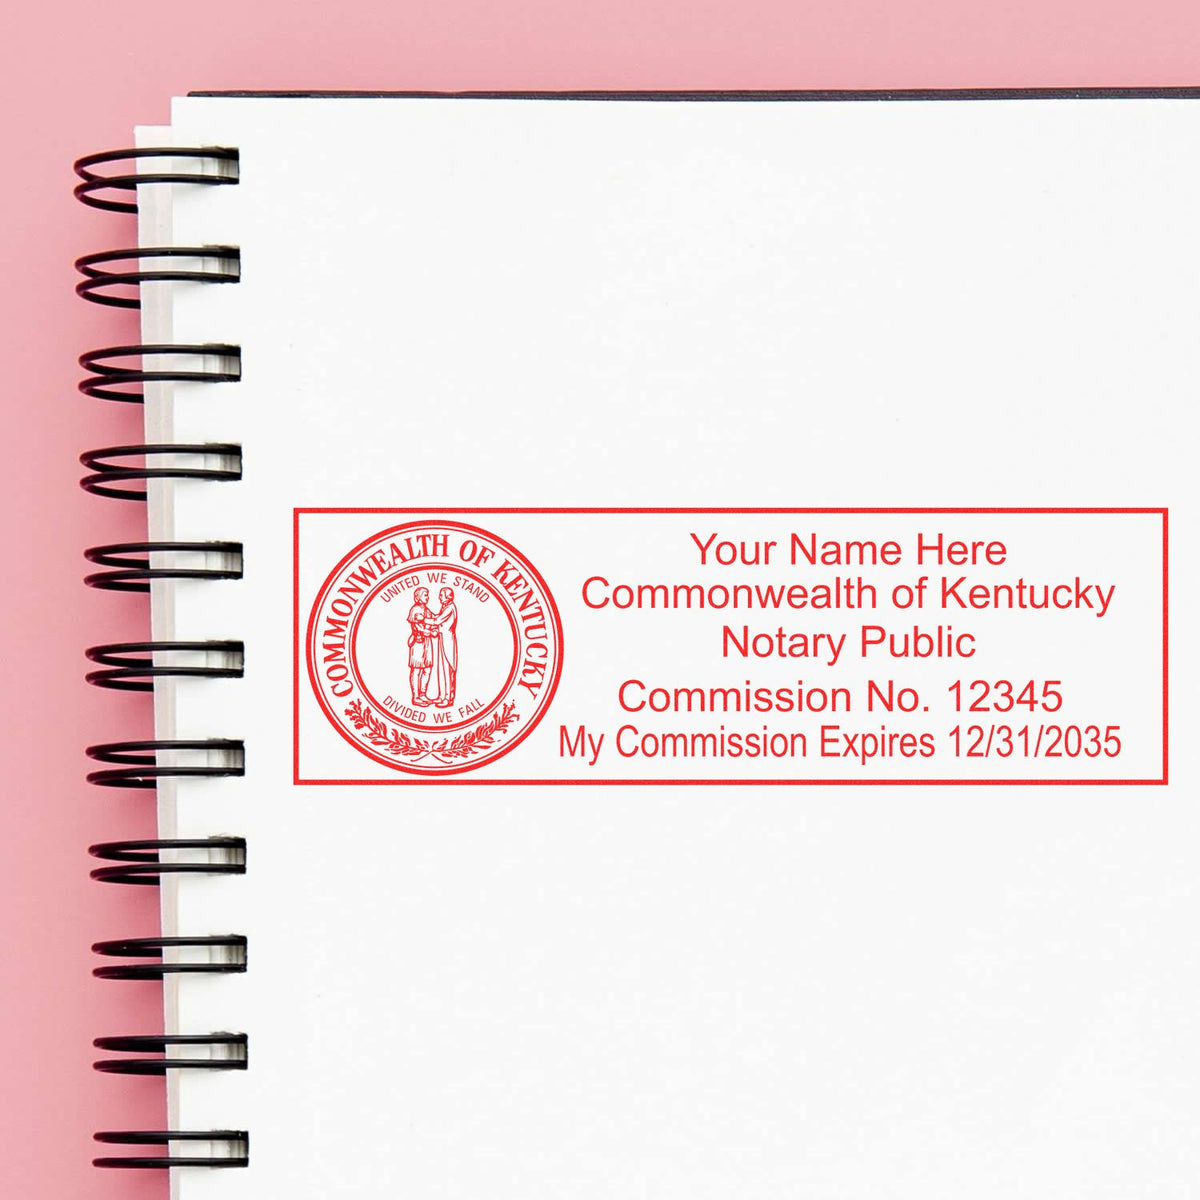 An alternative view of the Slim Pre-Inked State Seal Notary Stamp for Kentucky stamped on a sheet of paper showing the image in use